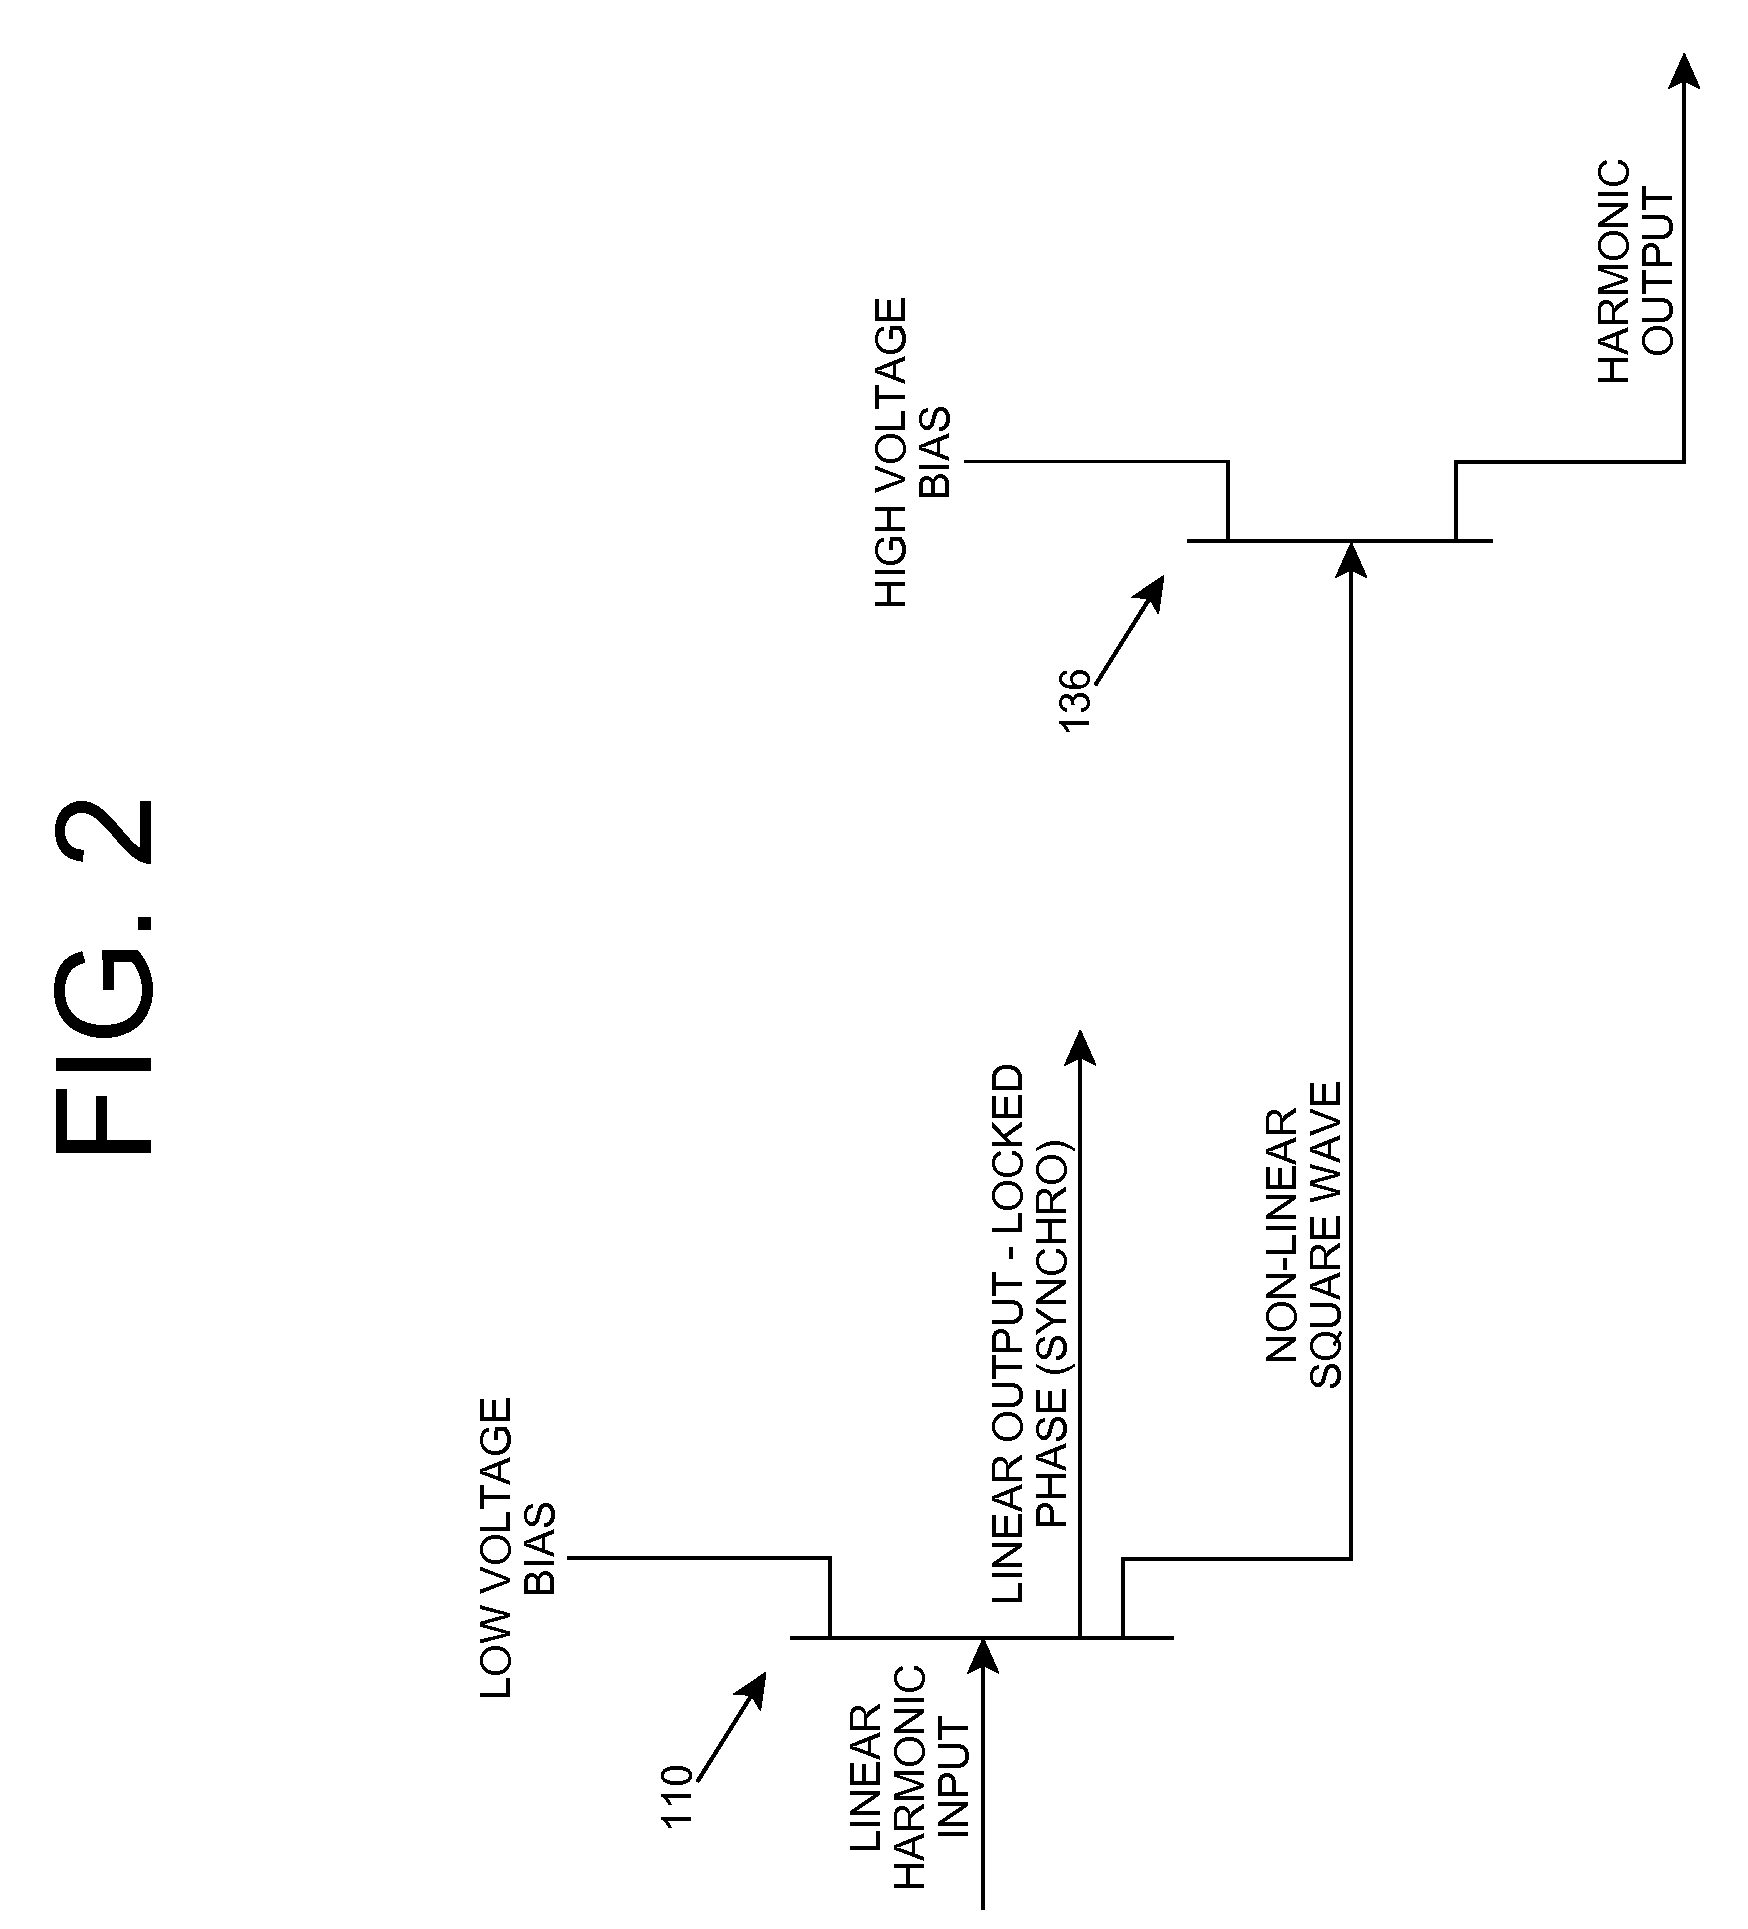 Two-stage amplification using intermediate non-linear square wave